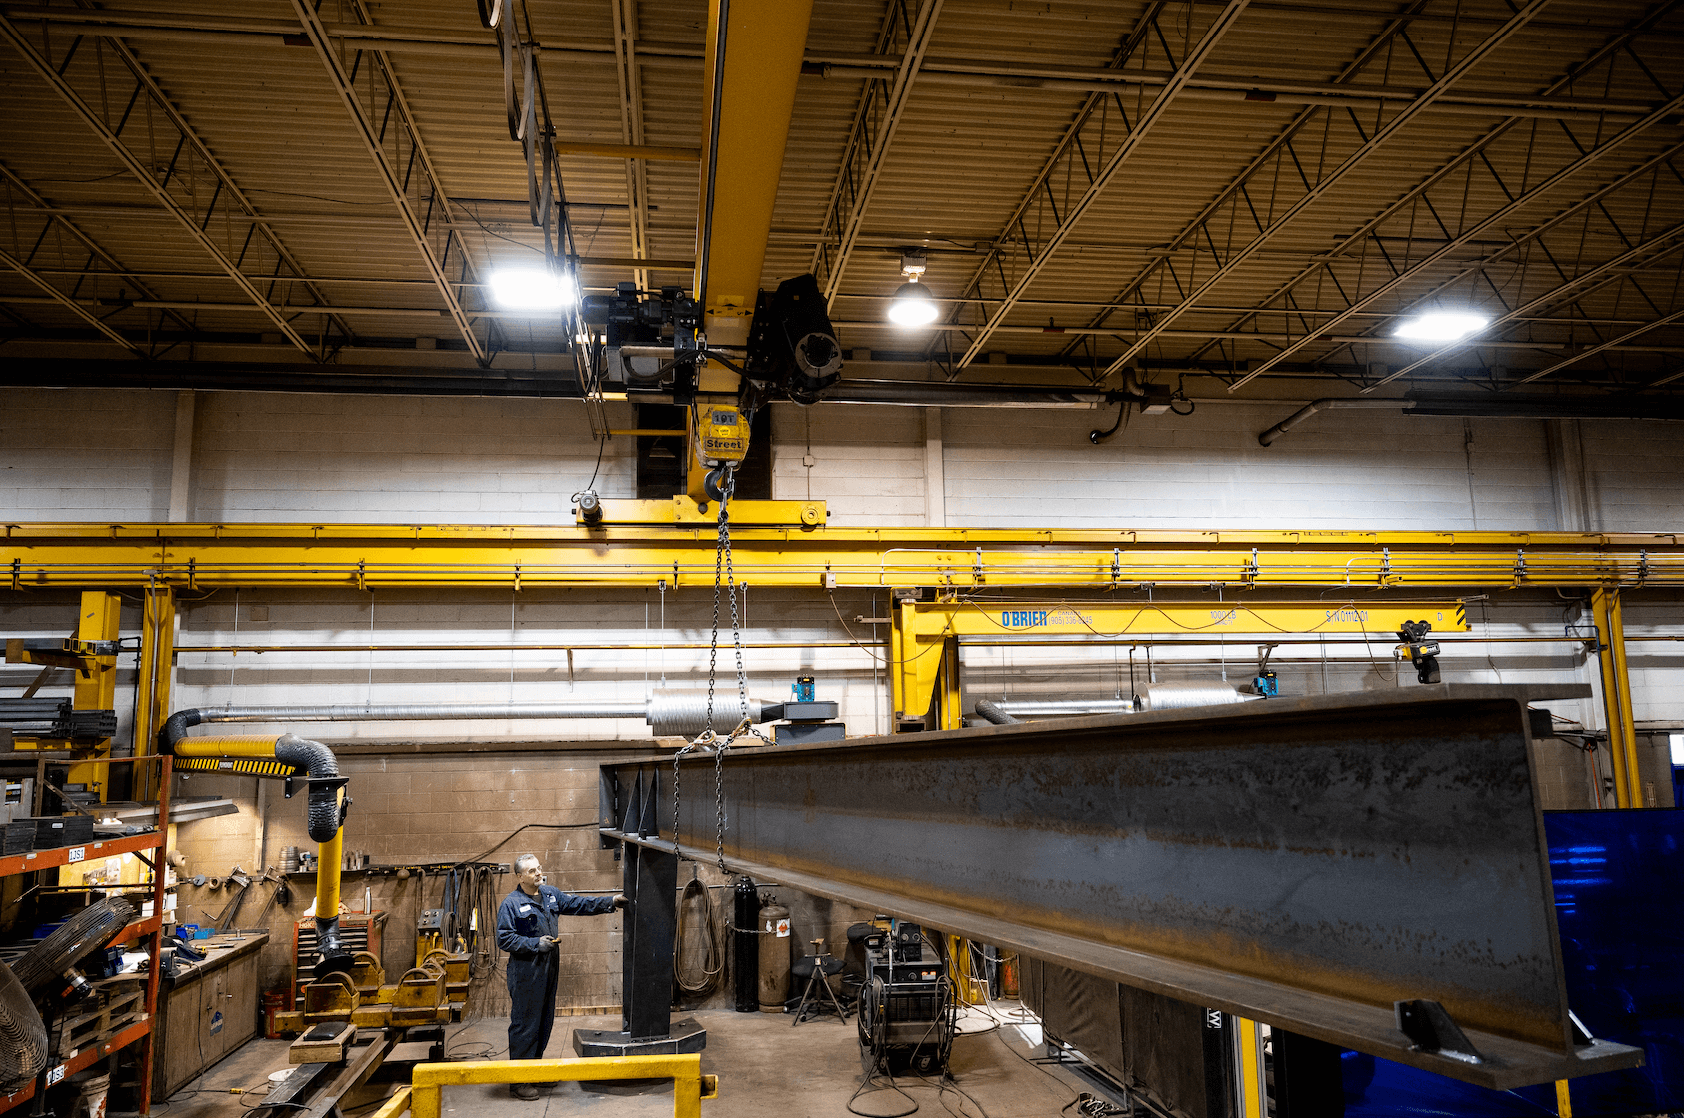 Chain Hoist, Wire Rope, Electric, and Air Hoists – Which is Right for You?